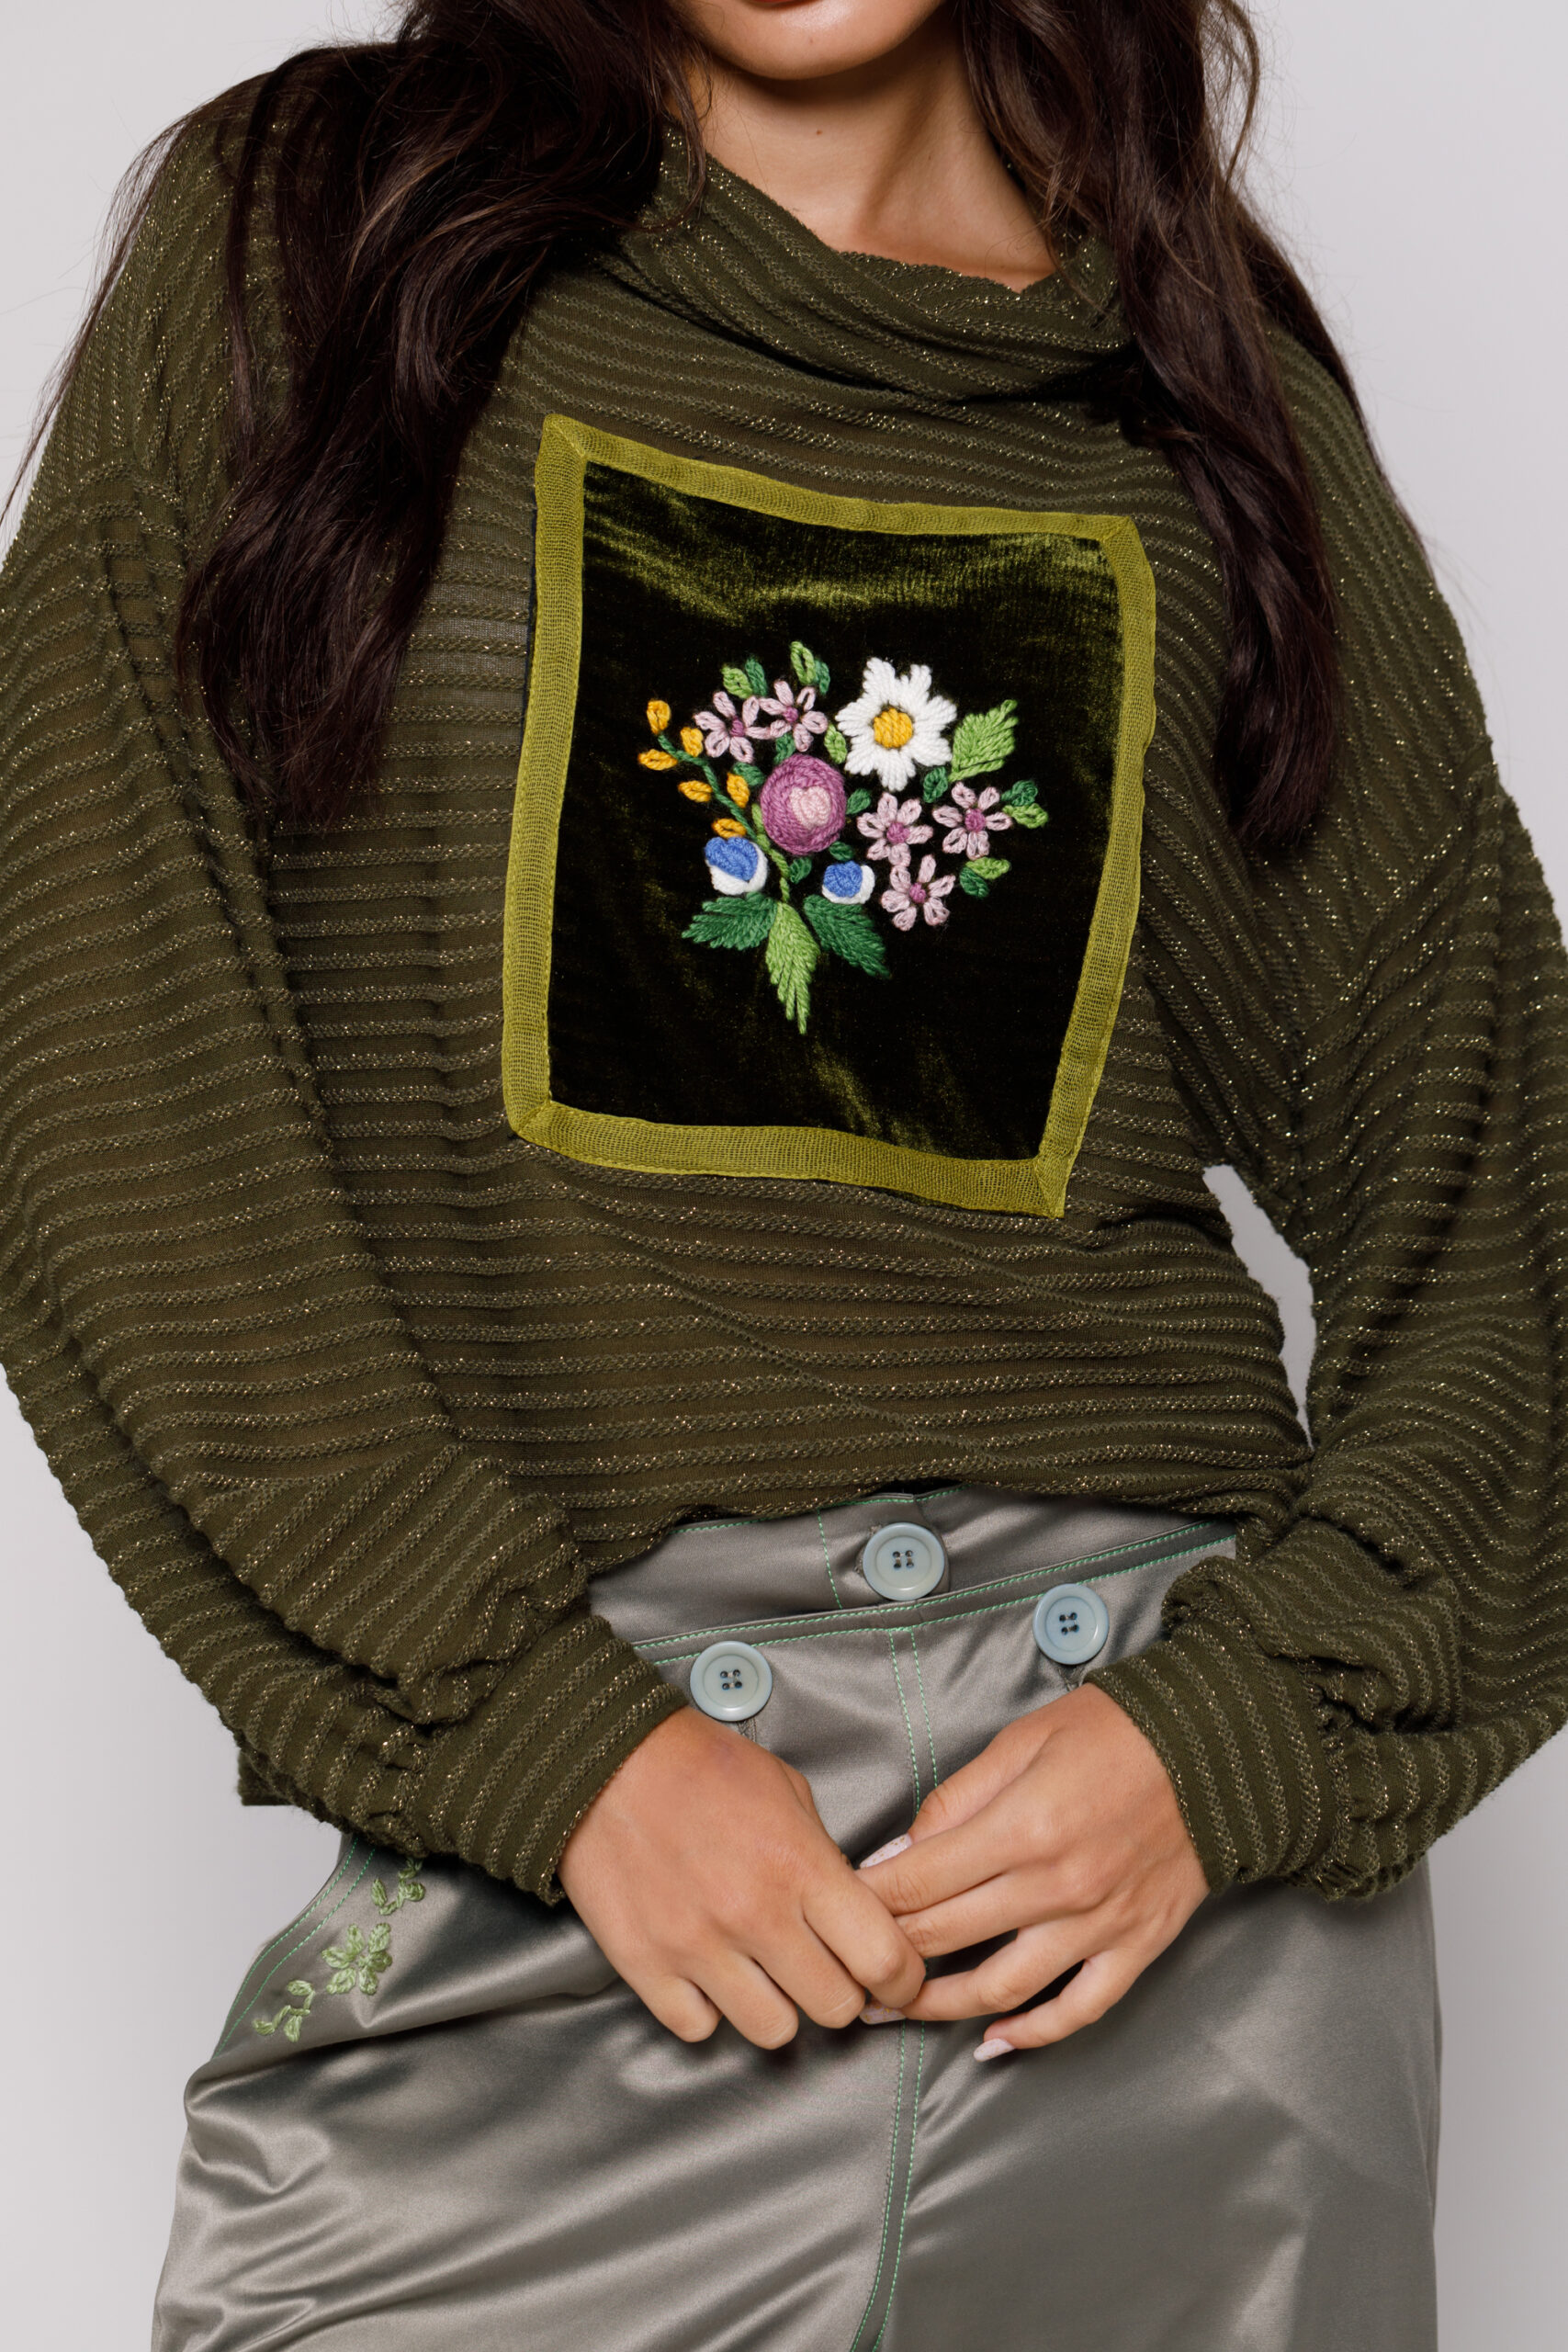 BREND casual green sweater with floral embroidery. Natural fabrics, original design, handmade embroidery